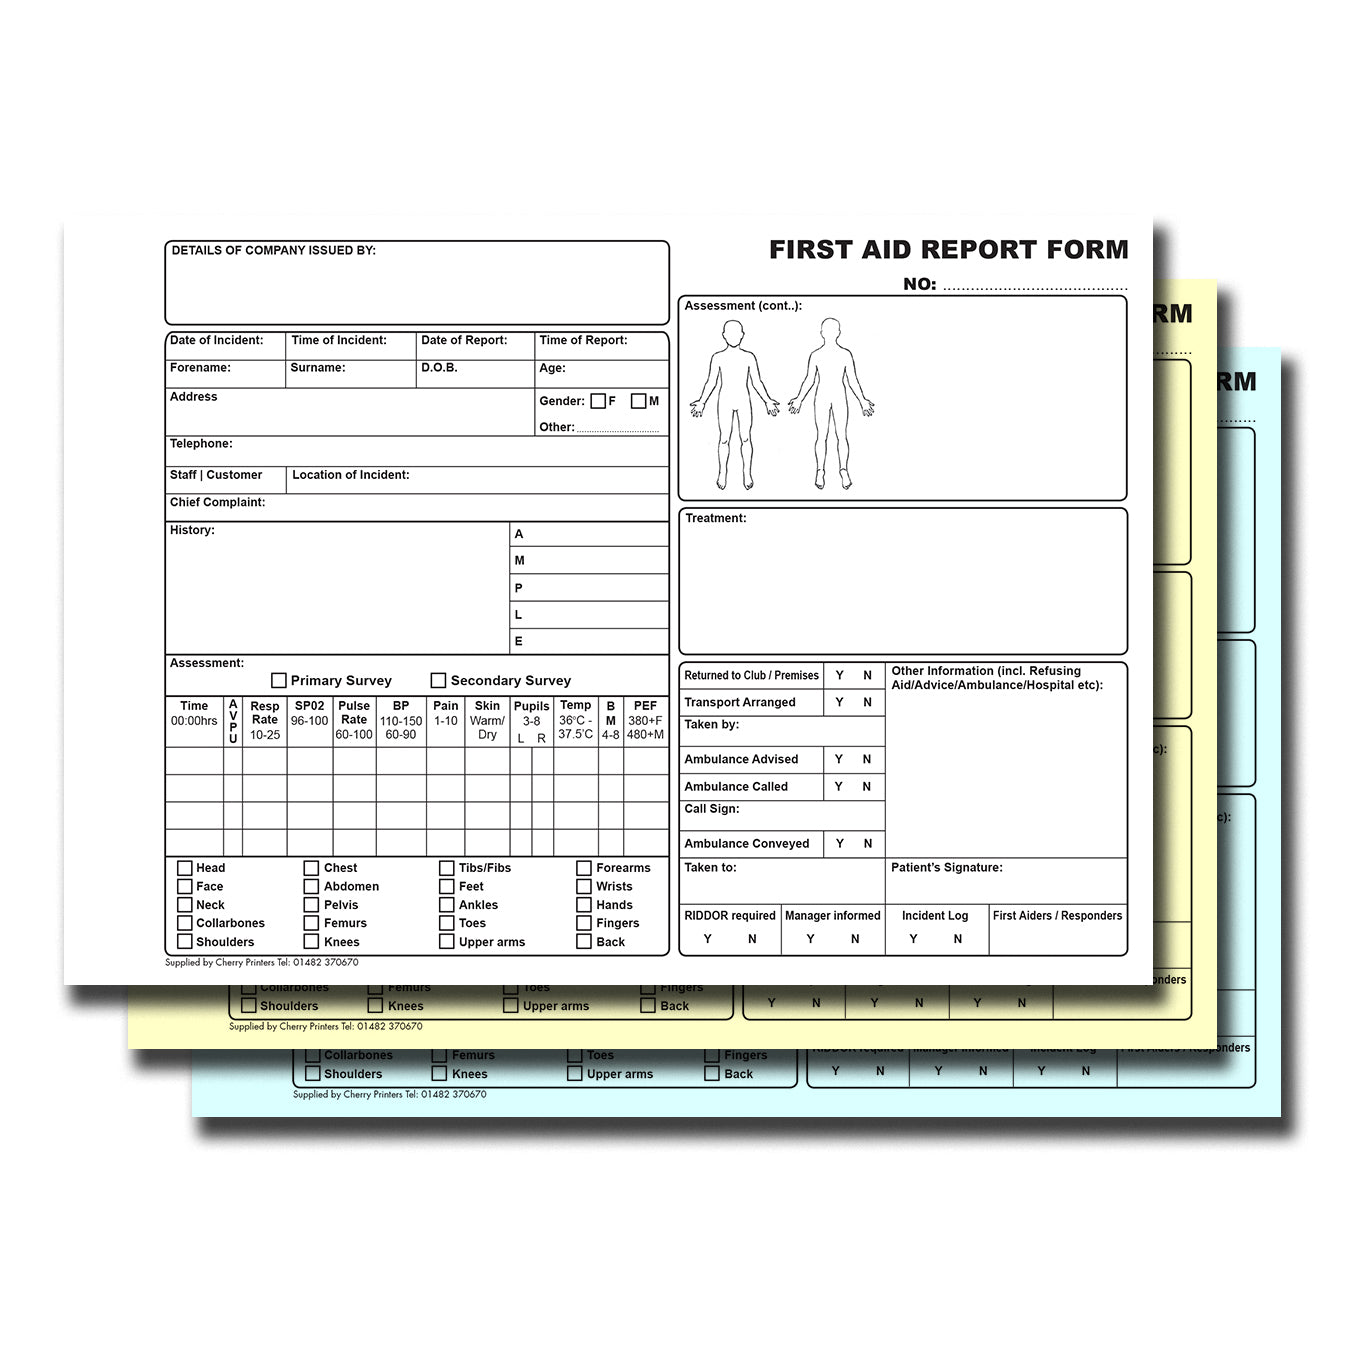 NCR First Aid Report Book A5 Triplicate